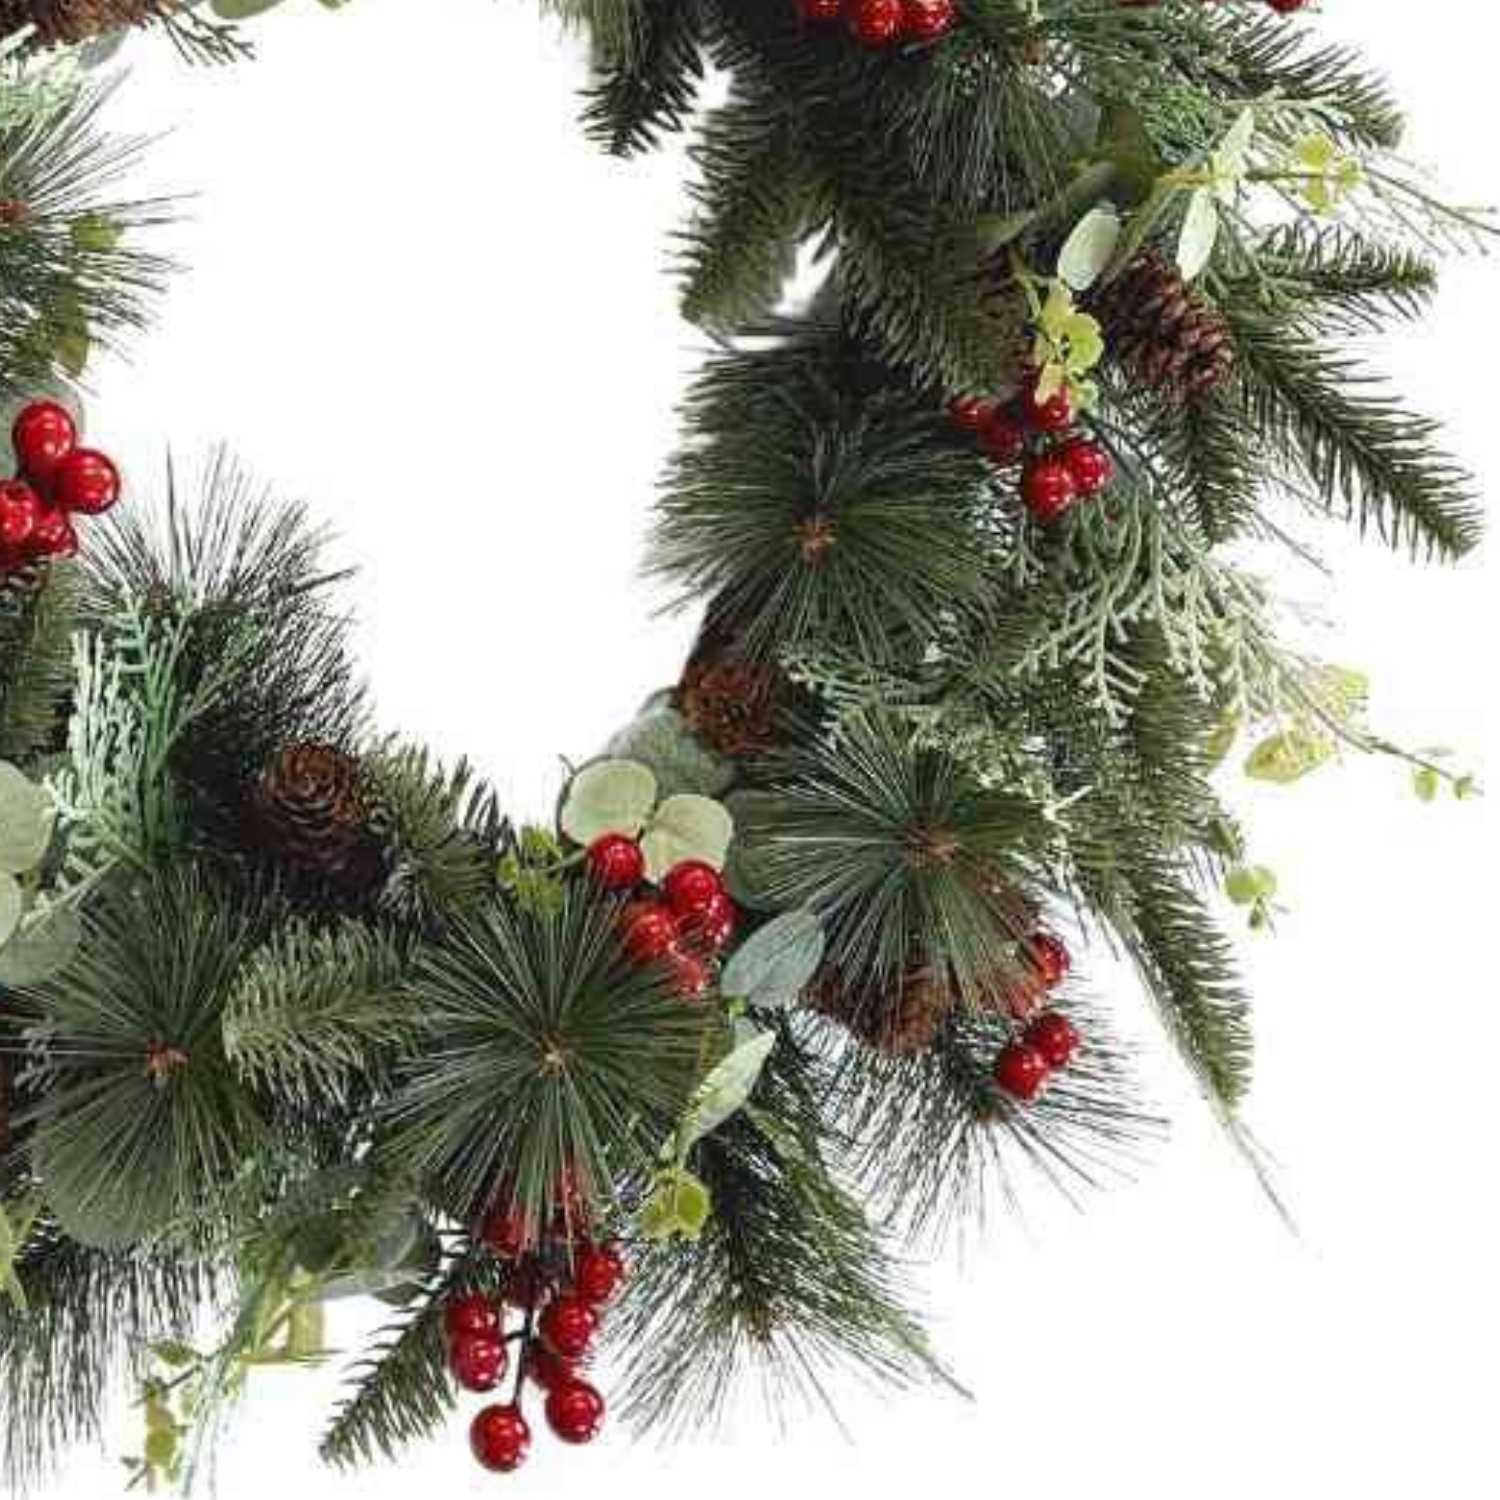 Christmas Red Berry Wreath